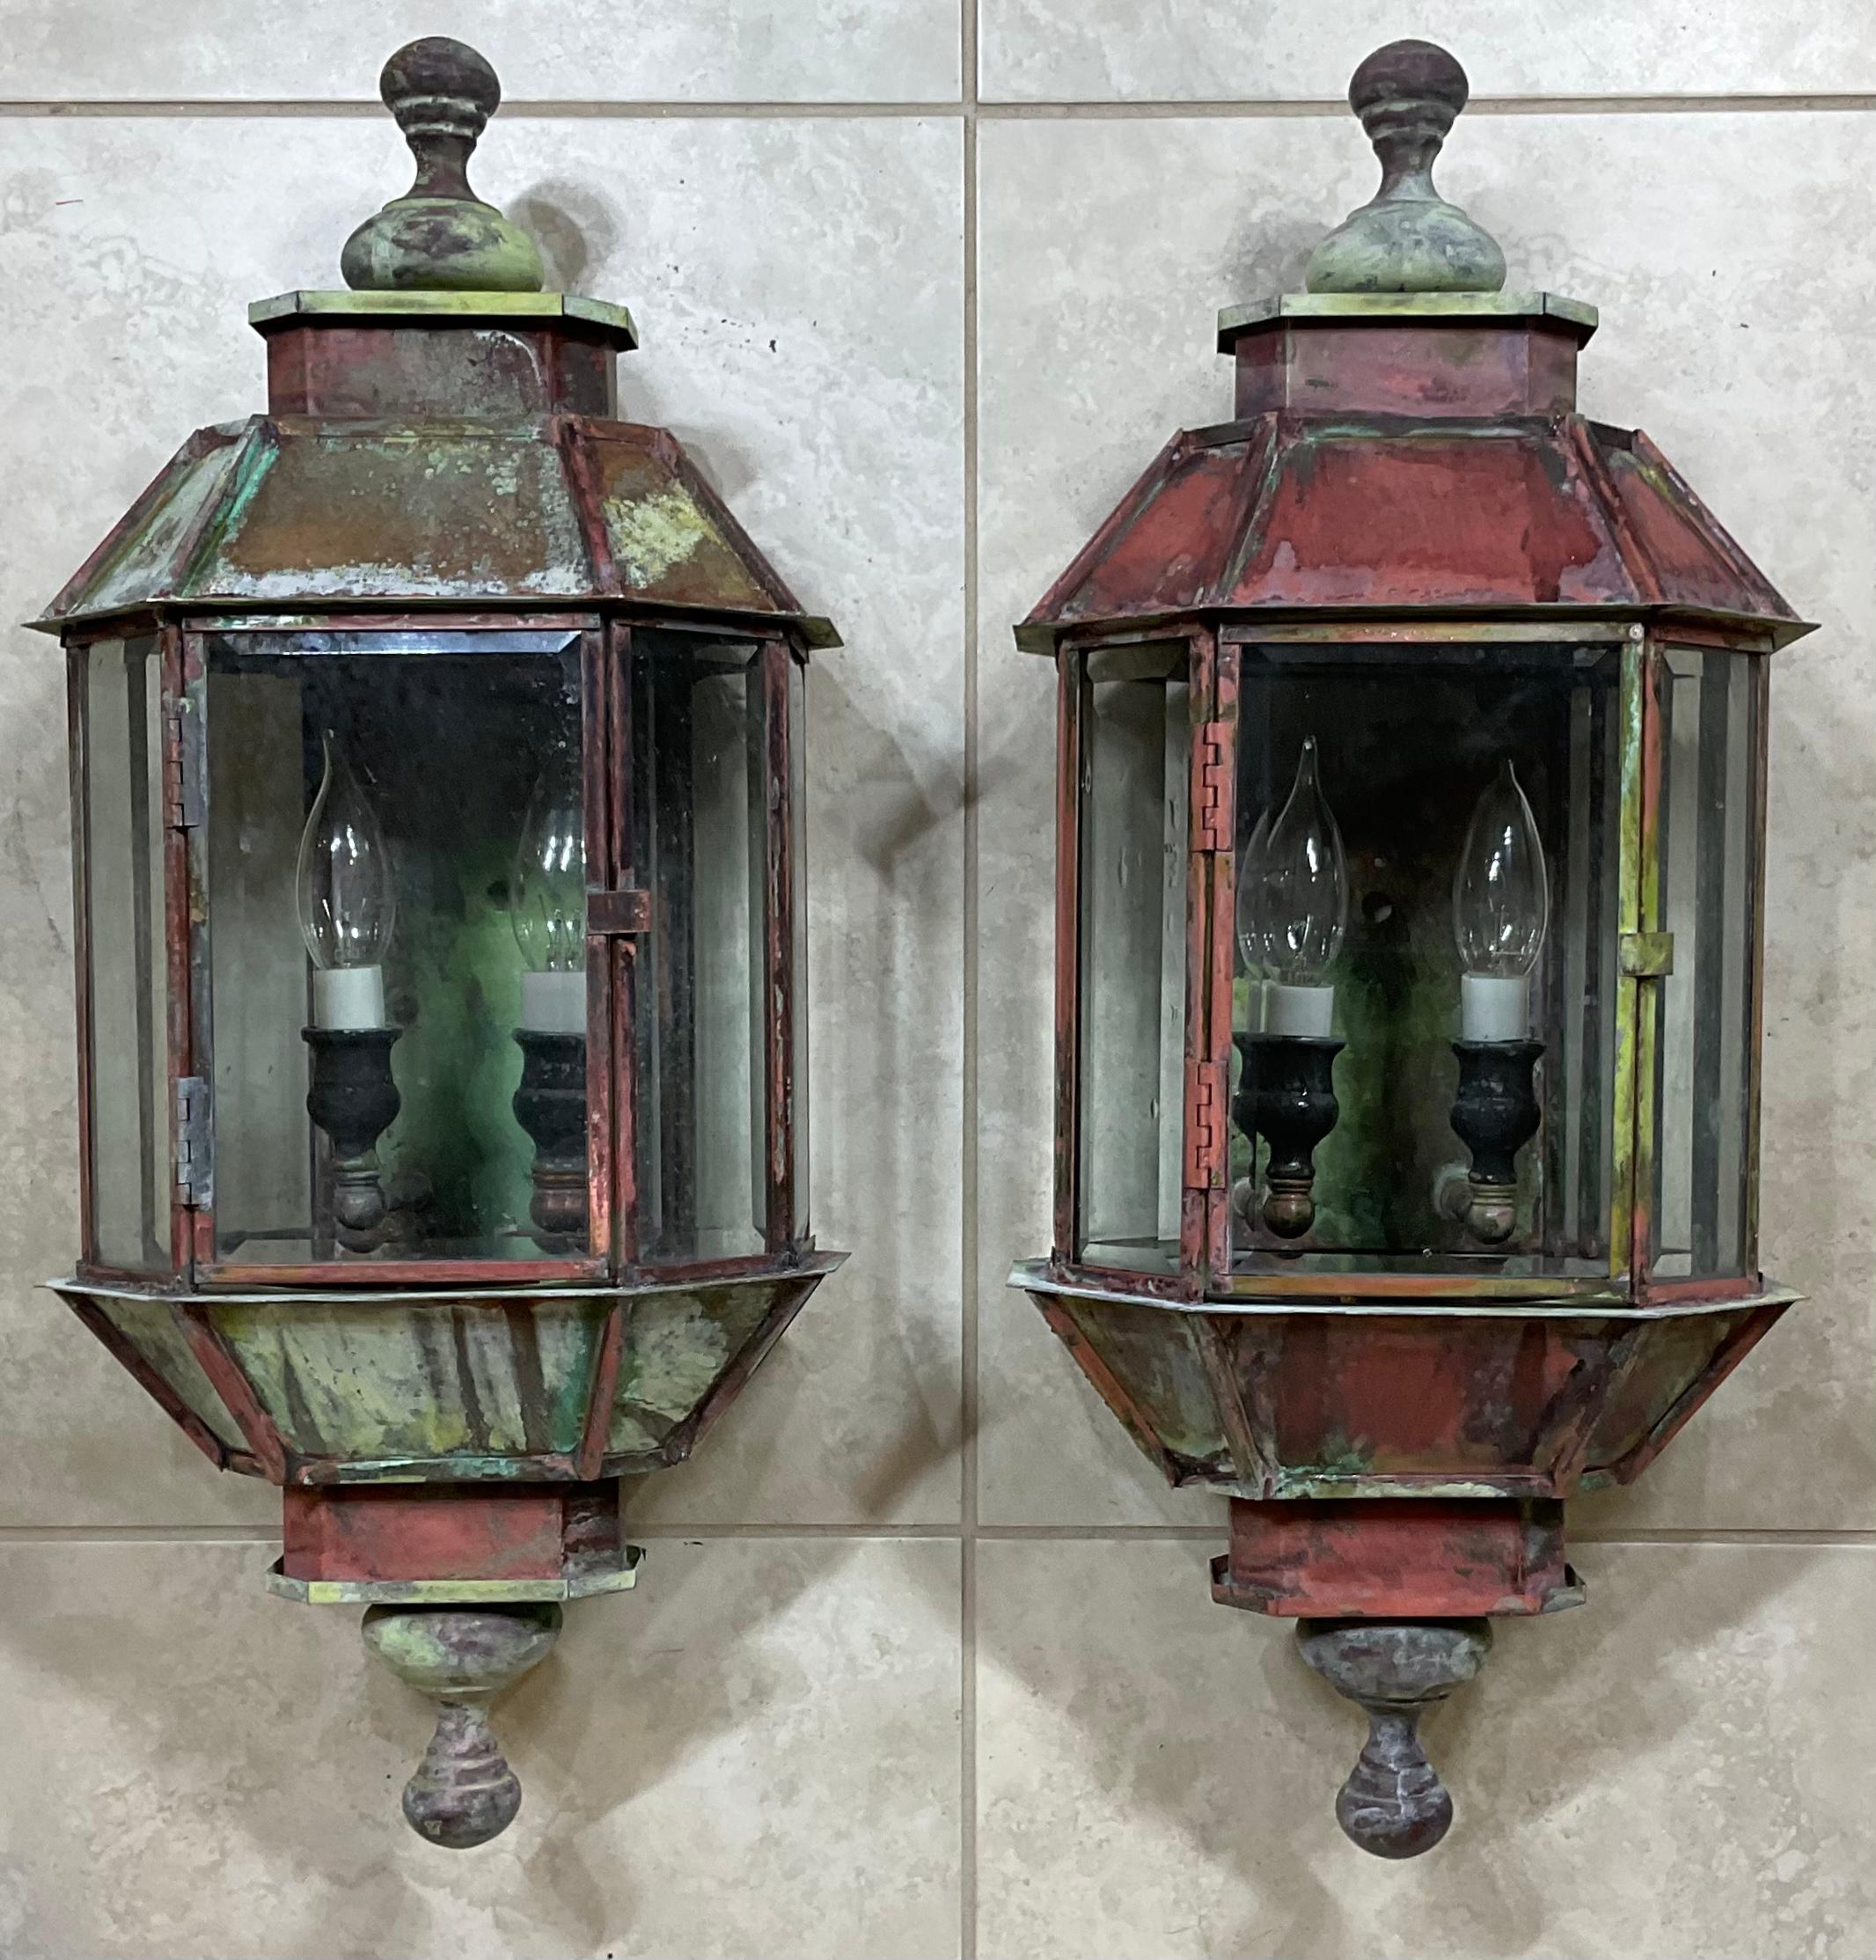 Exceptional pair of wall hanging lantern made of solid copper-brass, quality workmanship, seven sides of bevelled glass, electrified with two/60 watt lights each, beautiful patina Great light exposure. Working and ready to use.
Suitable for wet